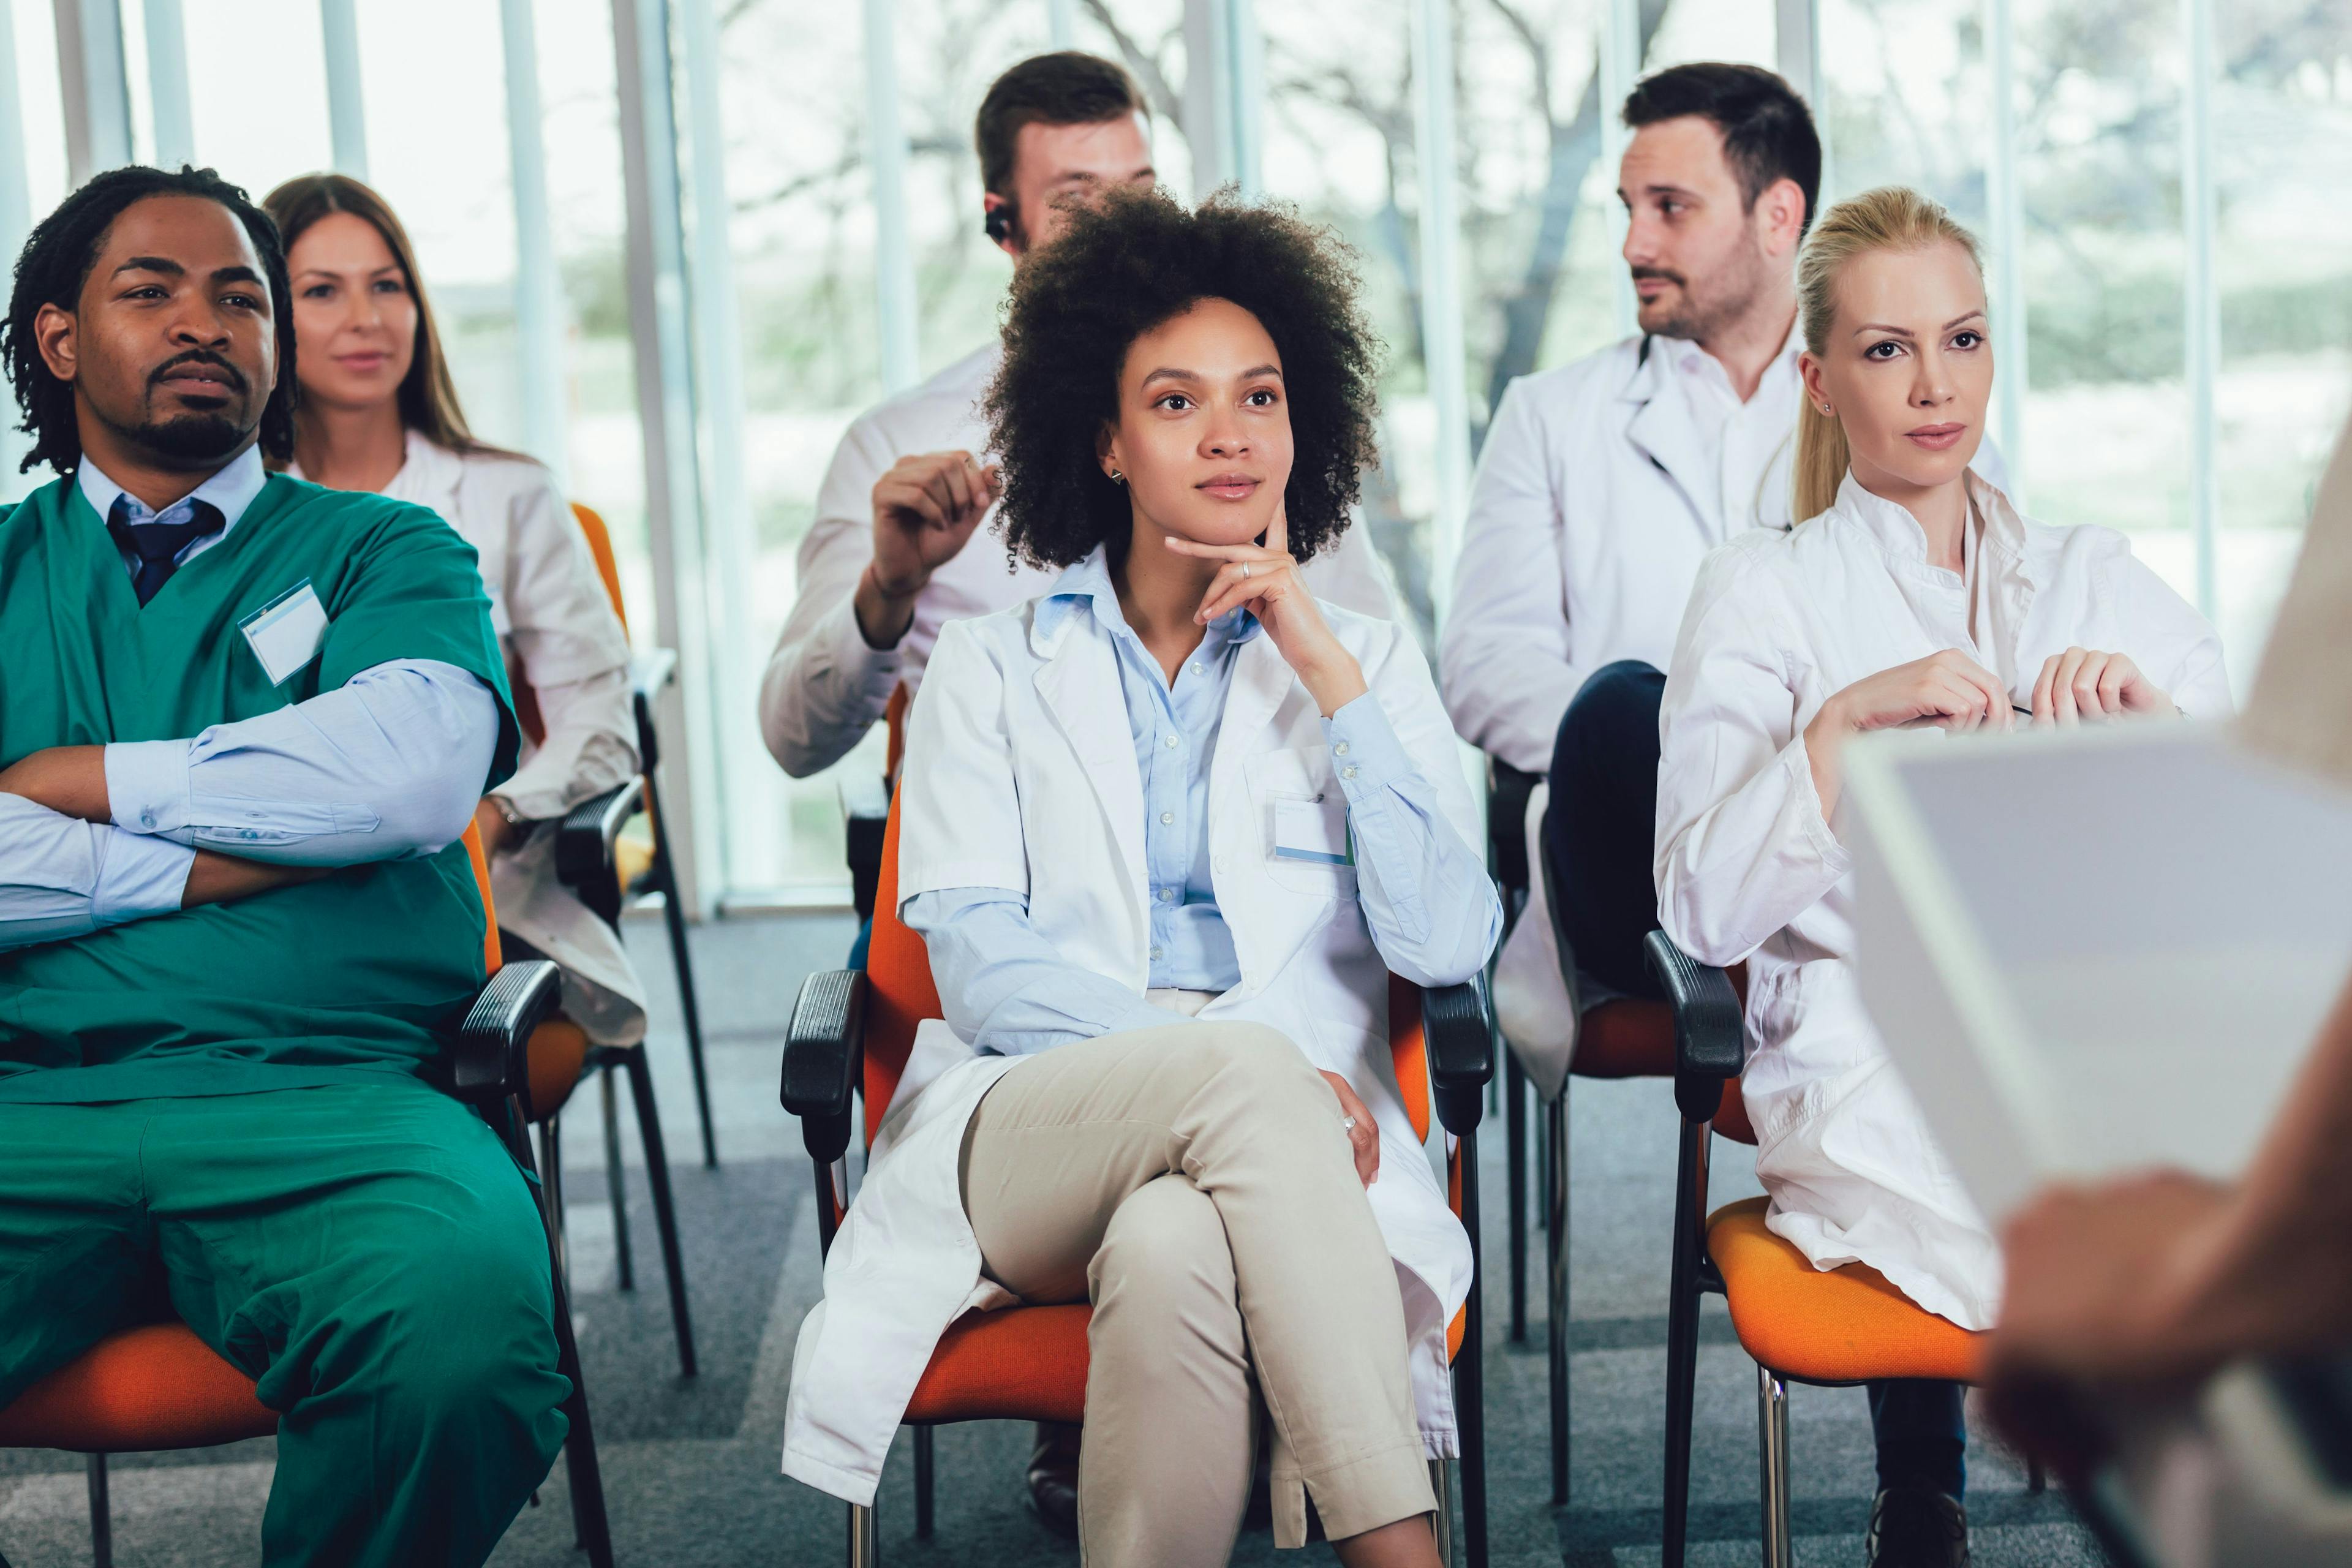 Three Methods for Effectively Training the Next Generation of Pharmacy Leaders